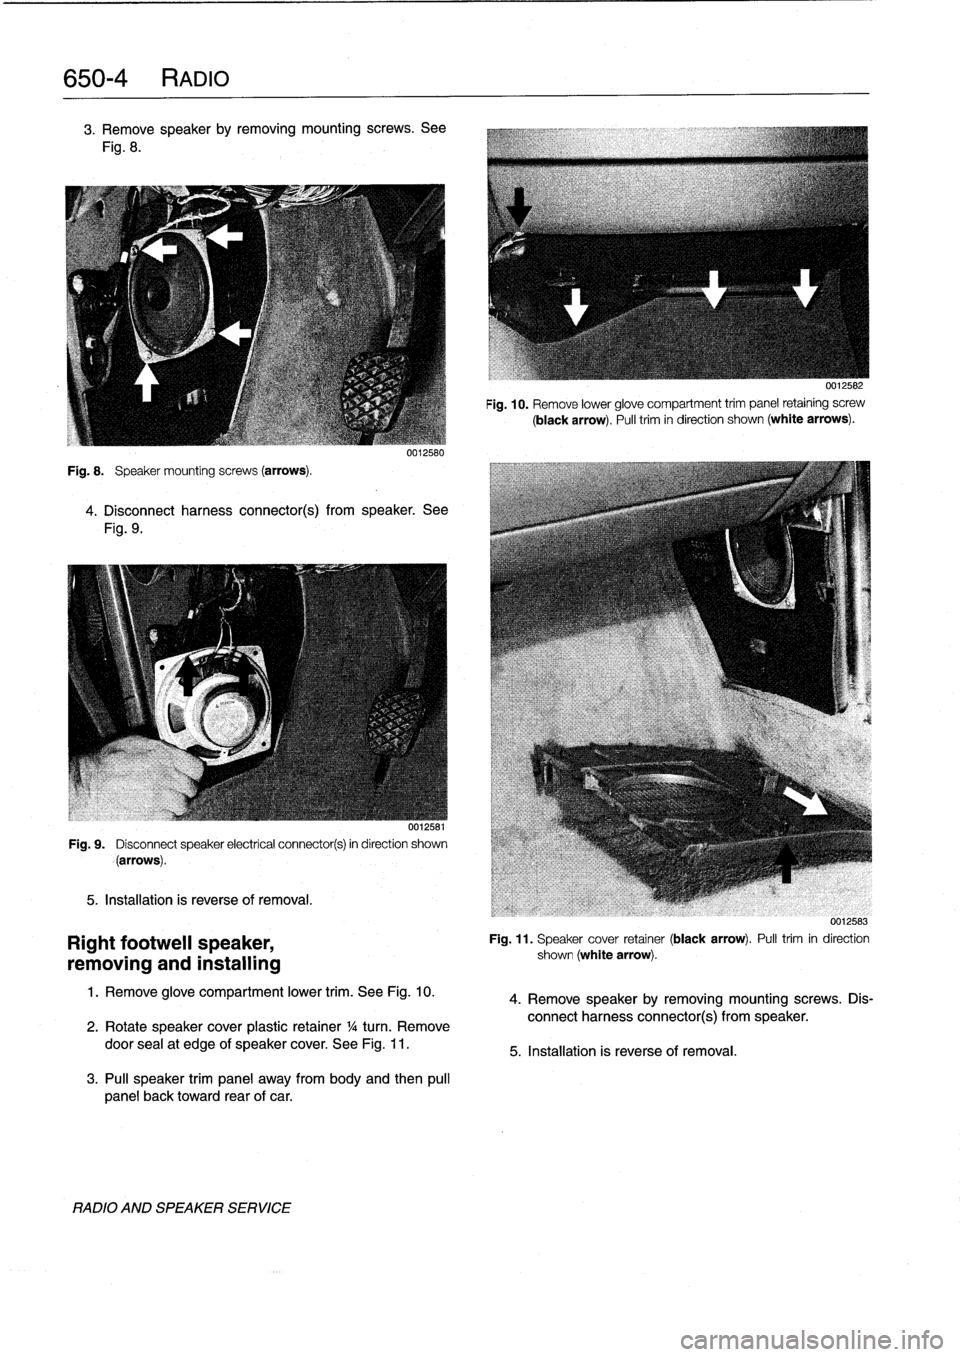 BMW M3 1993 E36 User Guide 
650-
4
RADIO

3
.
Remove
speakerby
removing
mountingscrews
.
See

Fig
.
8
.

Fig
.
8
.

	

Speaker
mounting
screws
(arrows)
.

0012580

4
.
Disconnect
harness
connector(s)
from
speaker
.
See

Fig
.
9